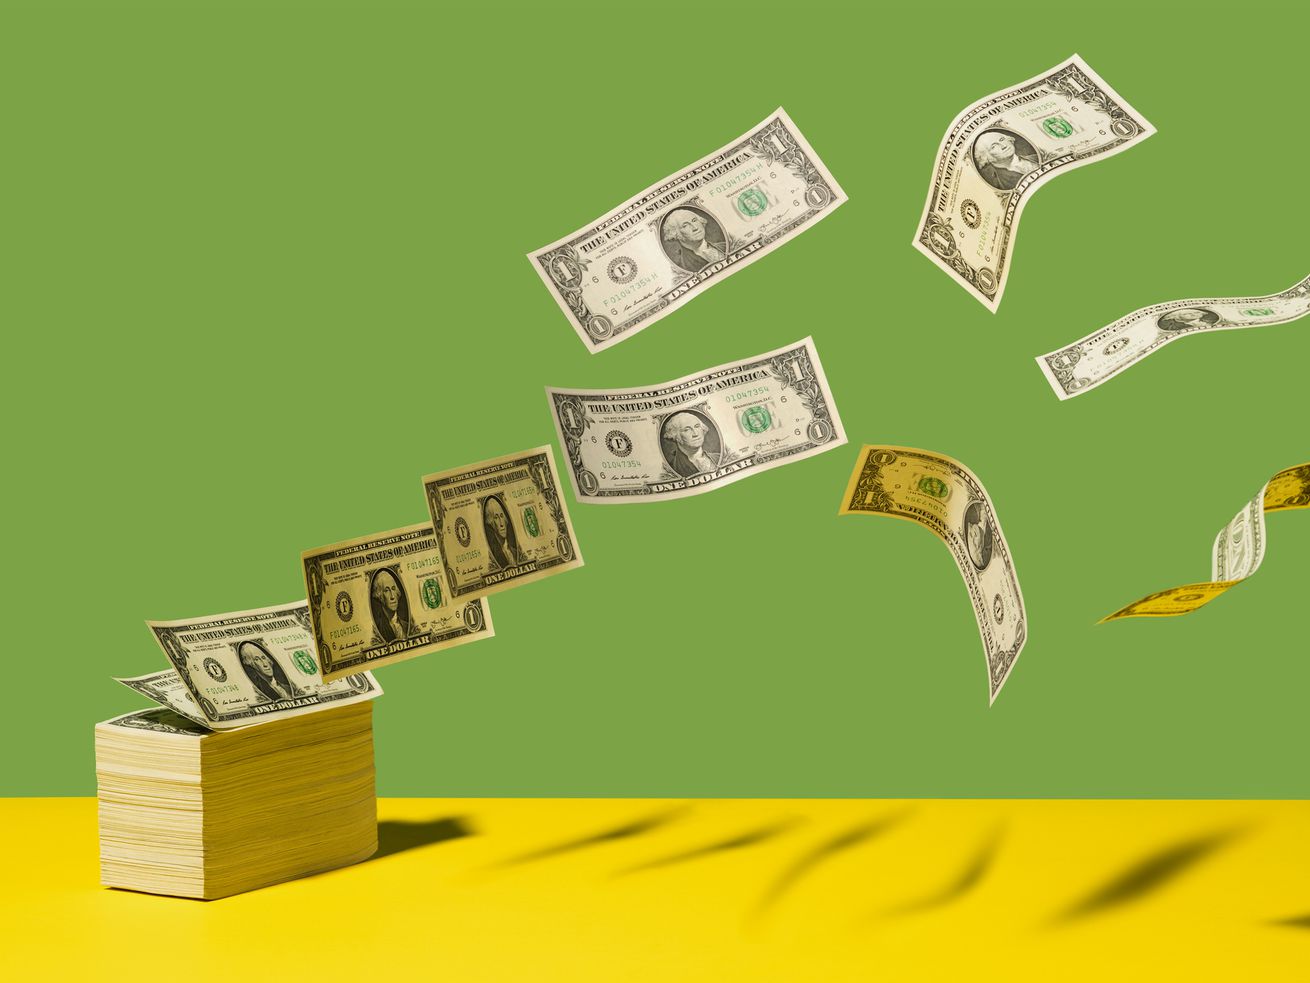 Stack of US $1 bills with bills flying away on yellow shelf, green background.